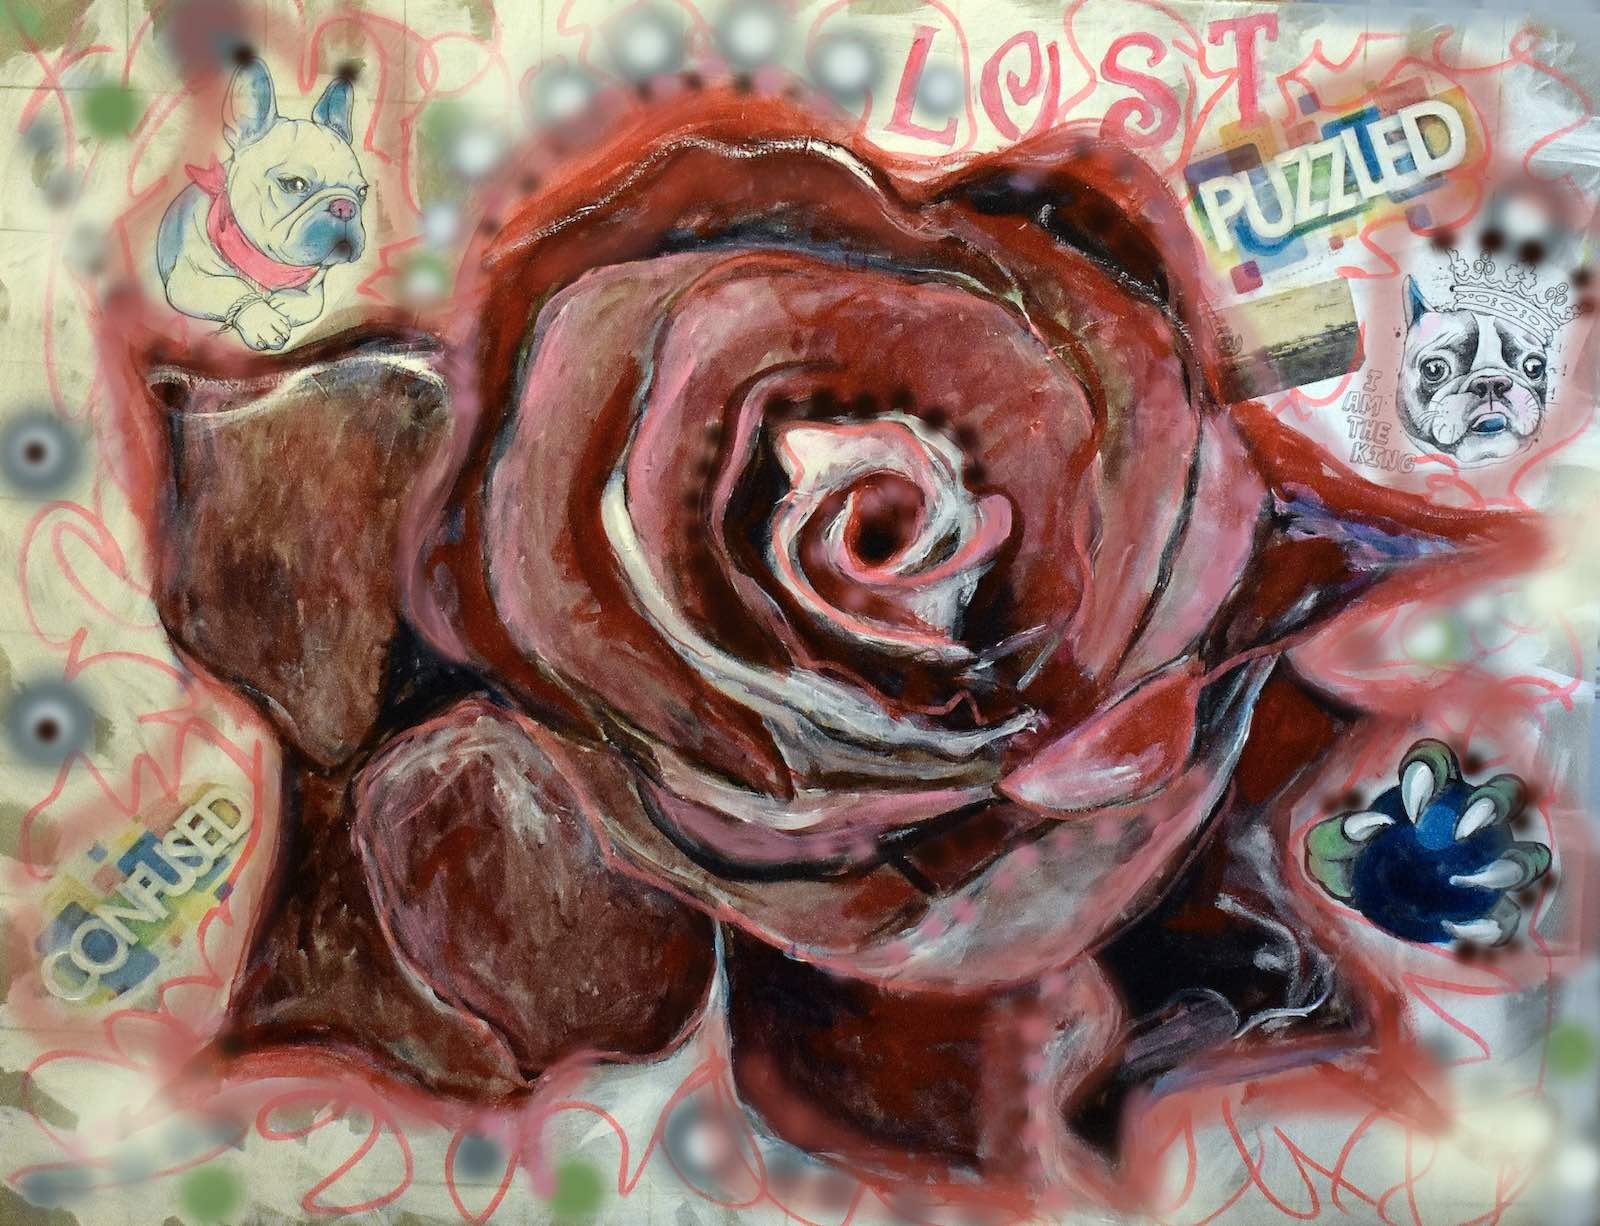 GILDA OLIVER artists team, LOST ROSES, 2014. Paper print measures 12 by 15 inches. This artwork also exists as an NFT.